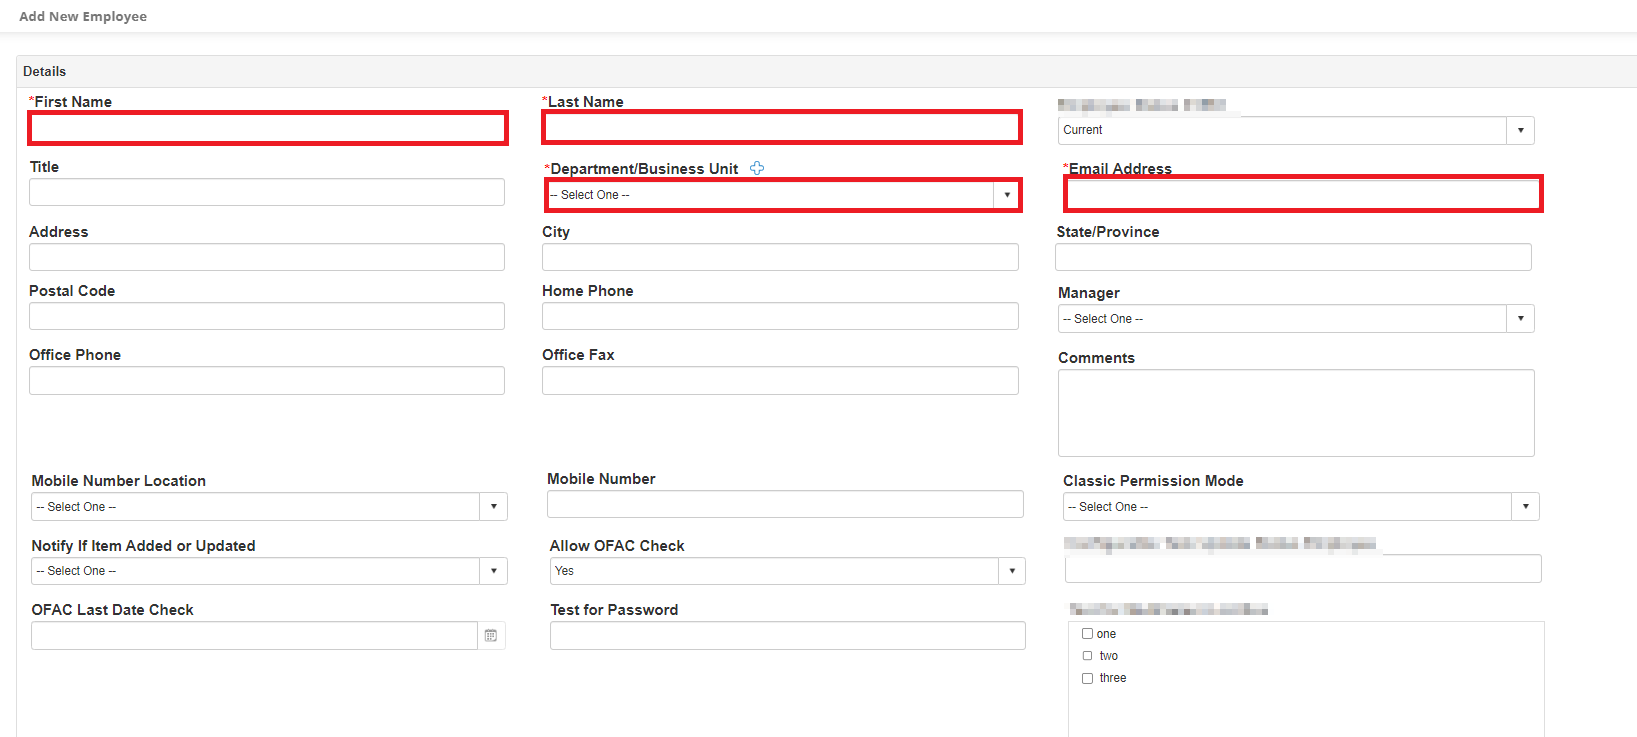 Image showing Required Fields on Employee Add